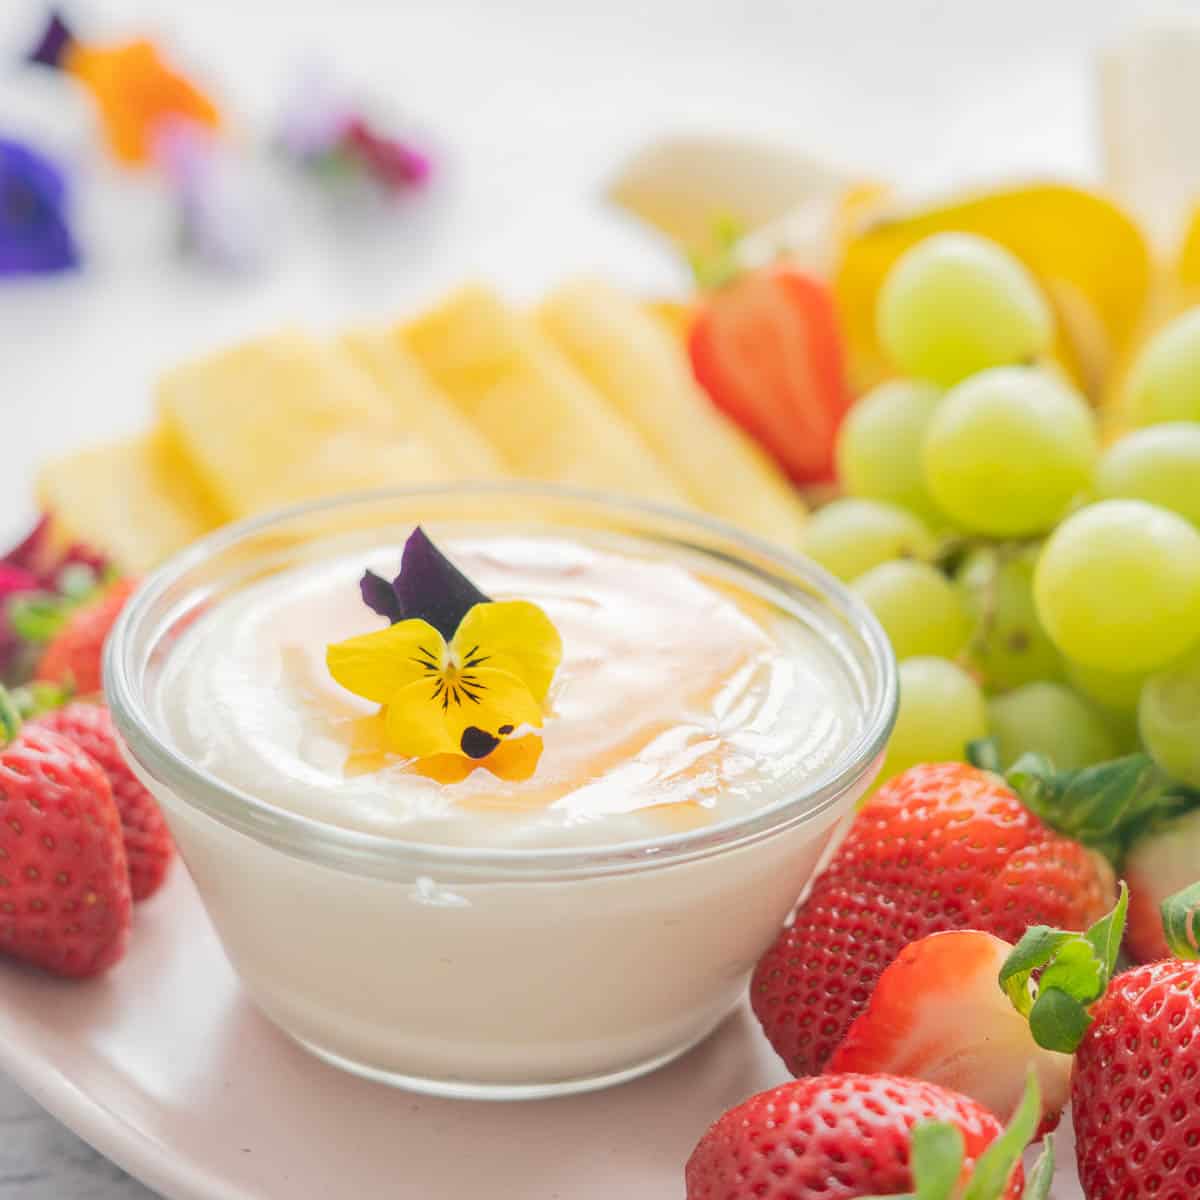 A plate full of fresh strawberries, grapes, bananas and pineapple and the Whipped cottage cheese dip in a glass ramekin 